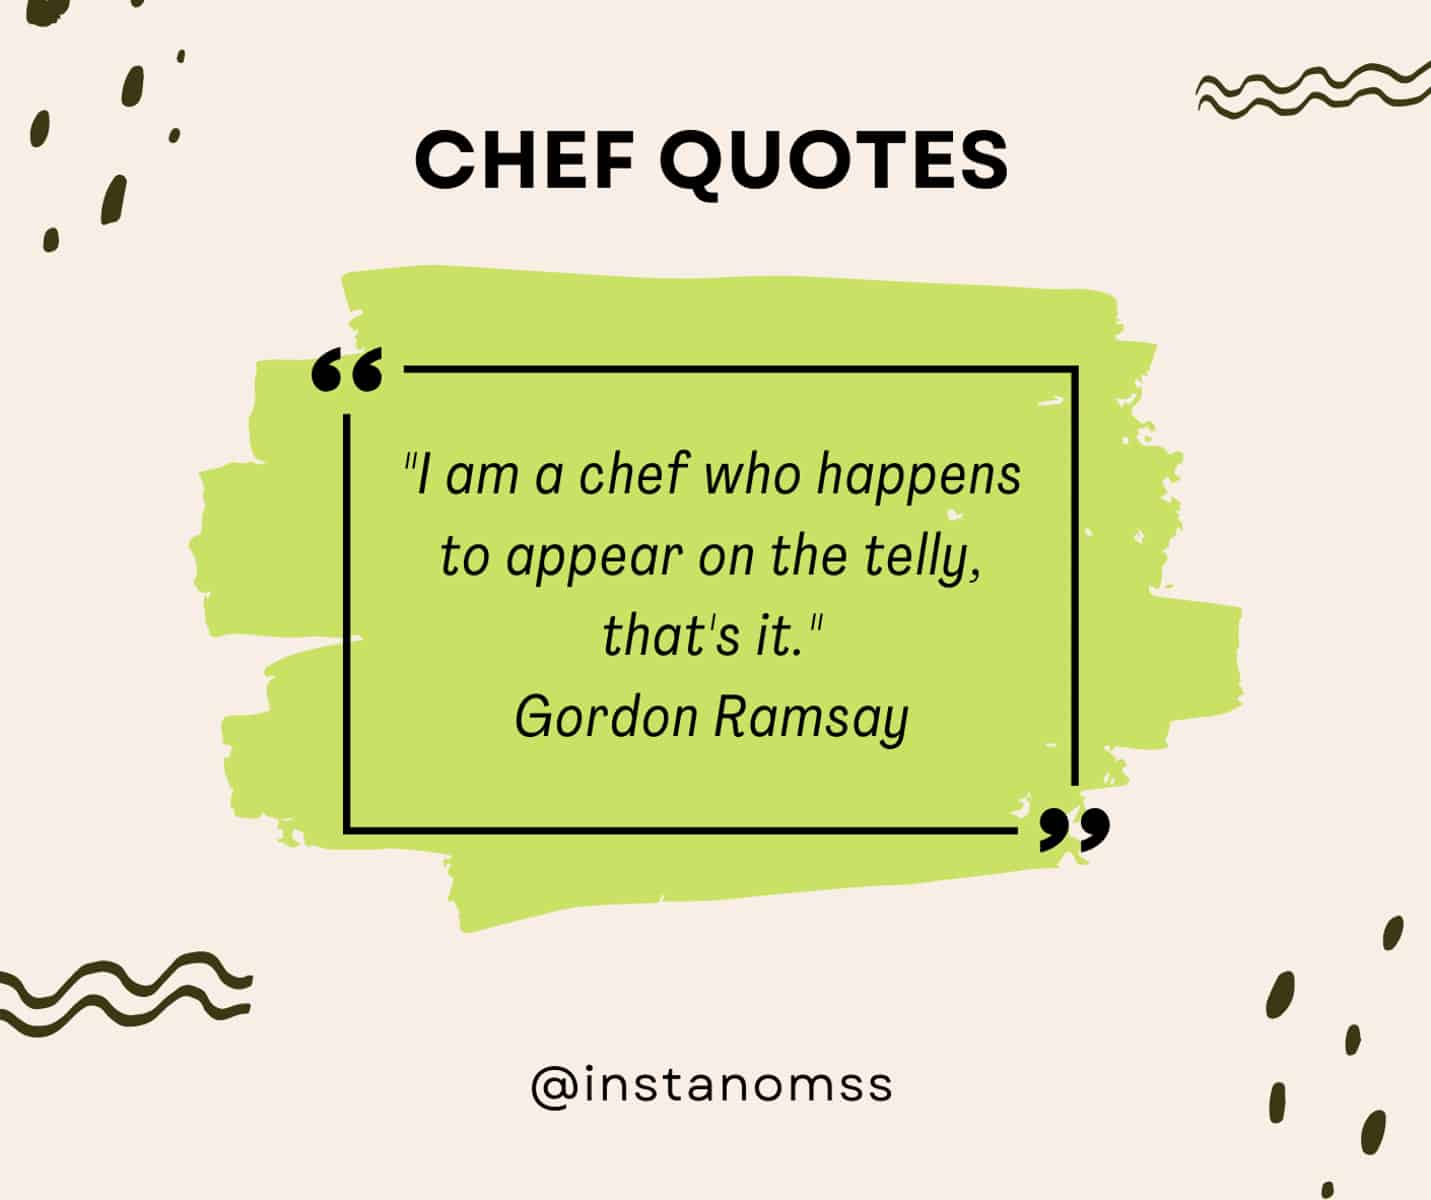 "I am a chef who happens to appear on the telly, that's it." Gordon Ramsay